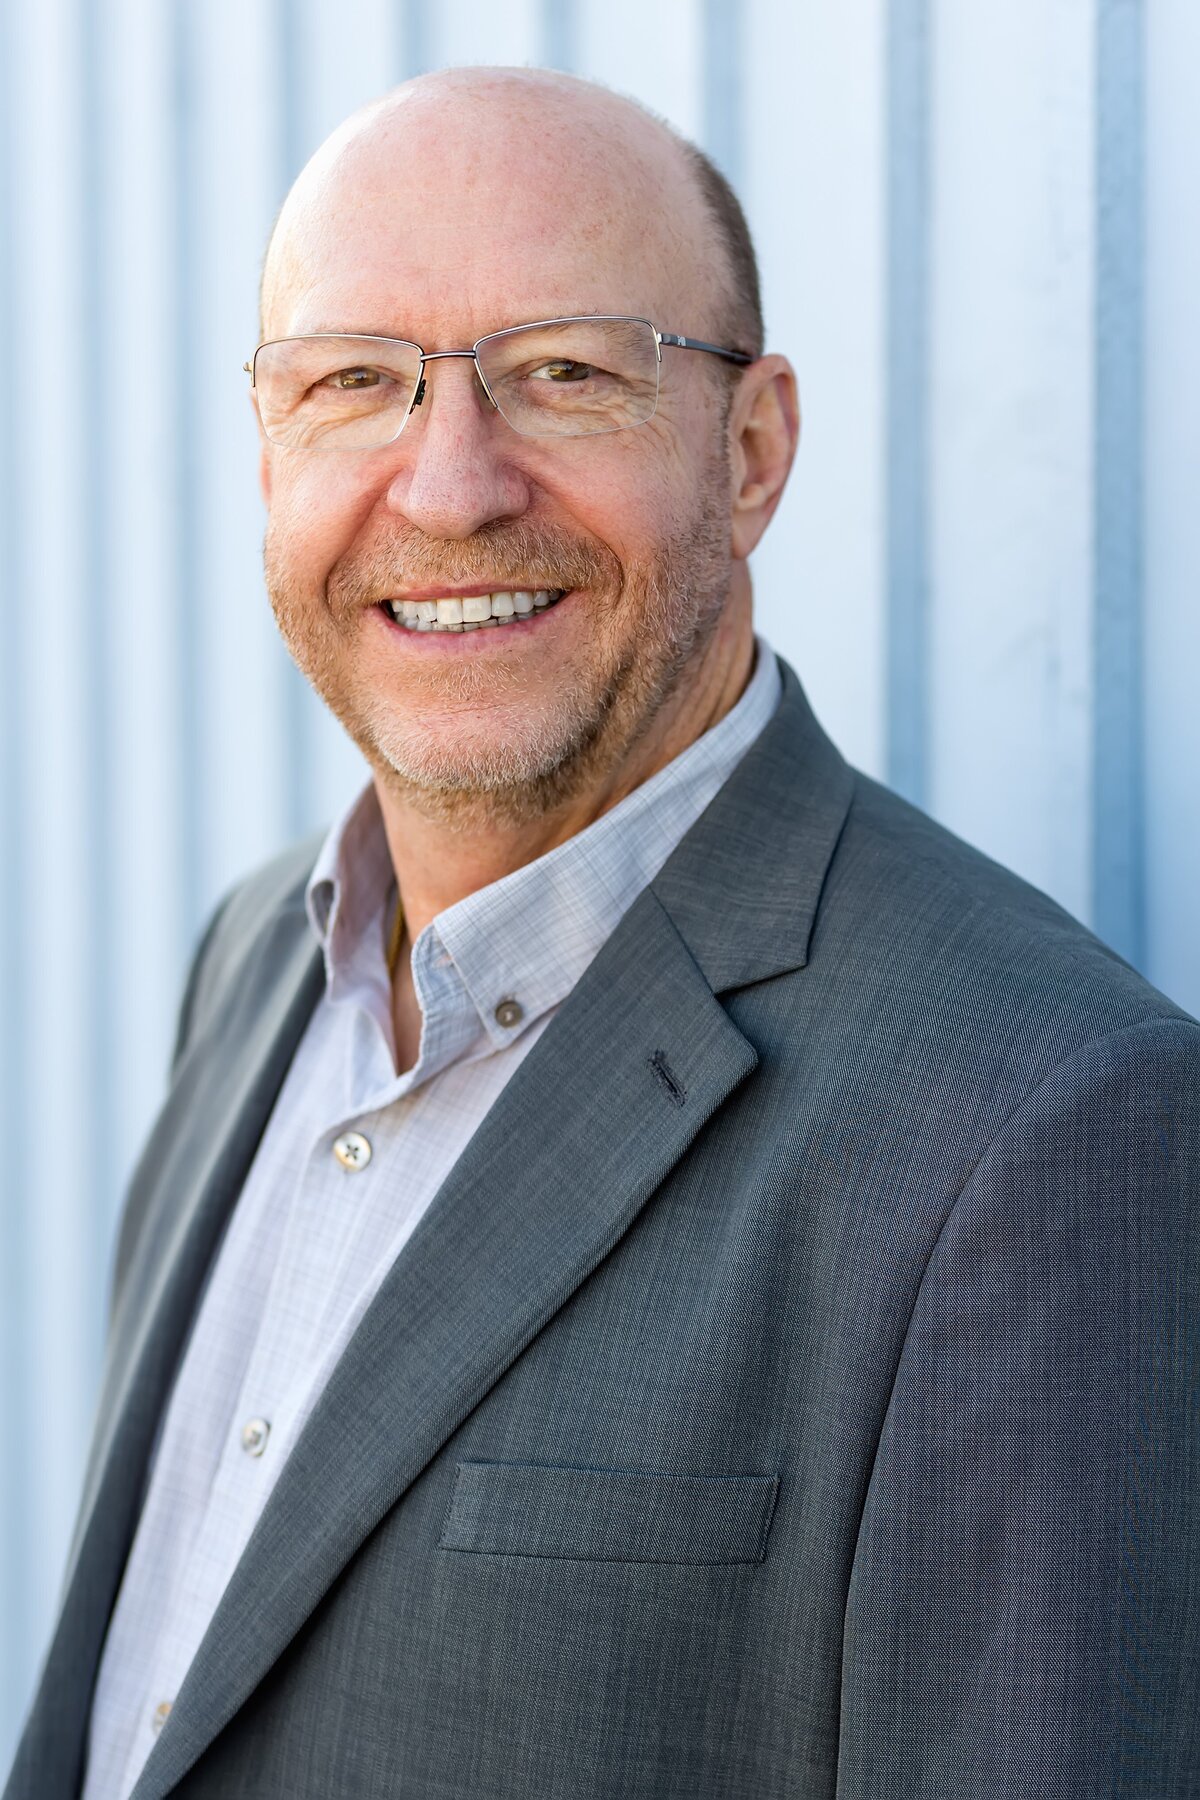 Linkedin headshot of man in suit jacket and wearing glasses while leaning against a blue wall